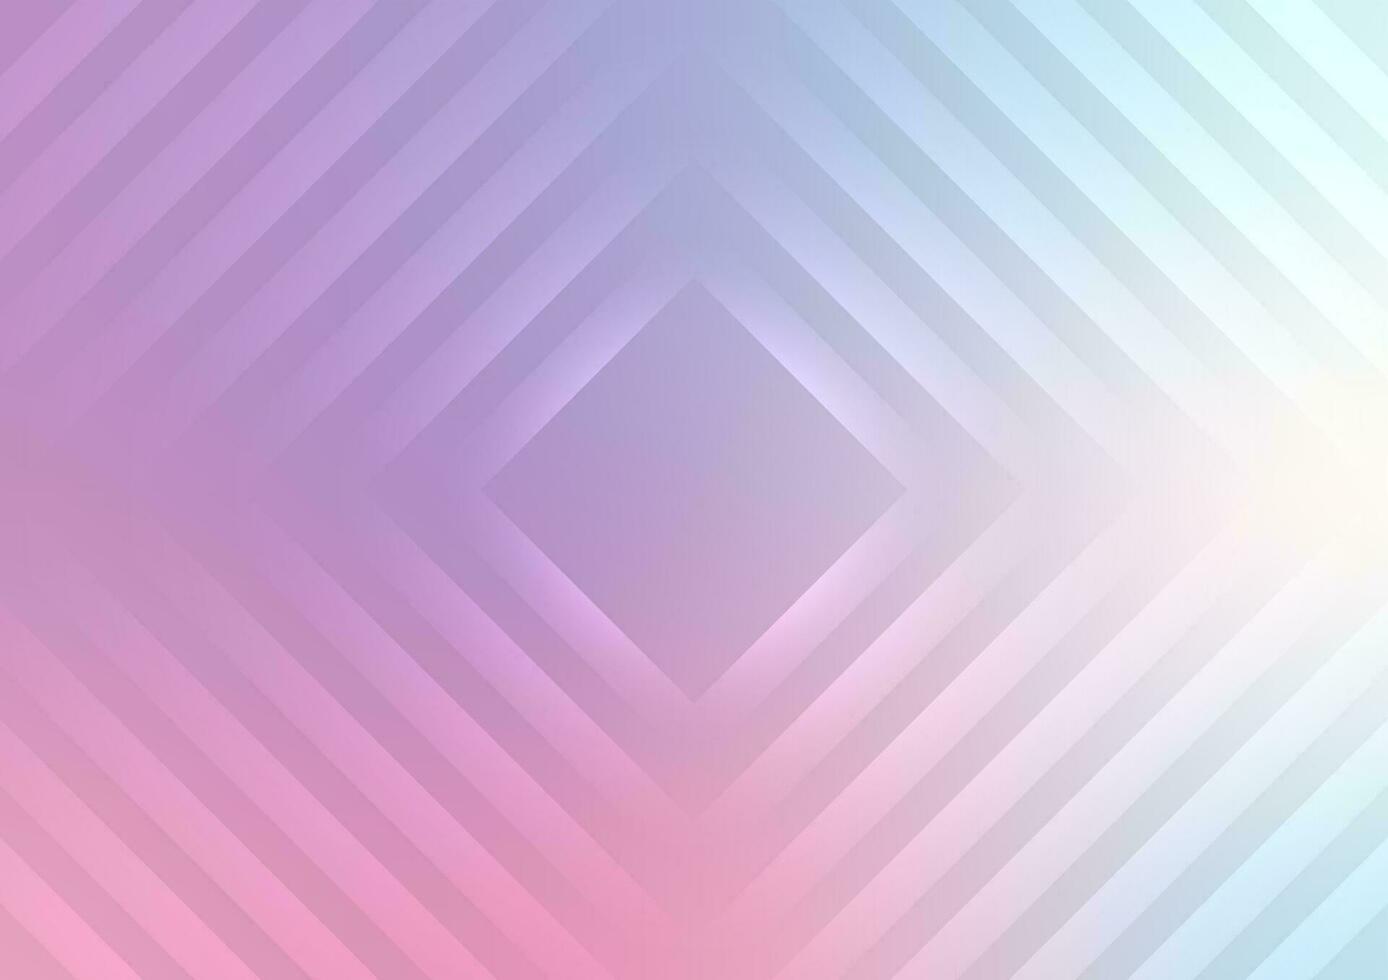 Soft colour gradient pattern square abstract presentation background vector